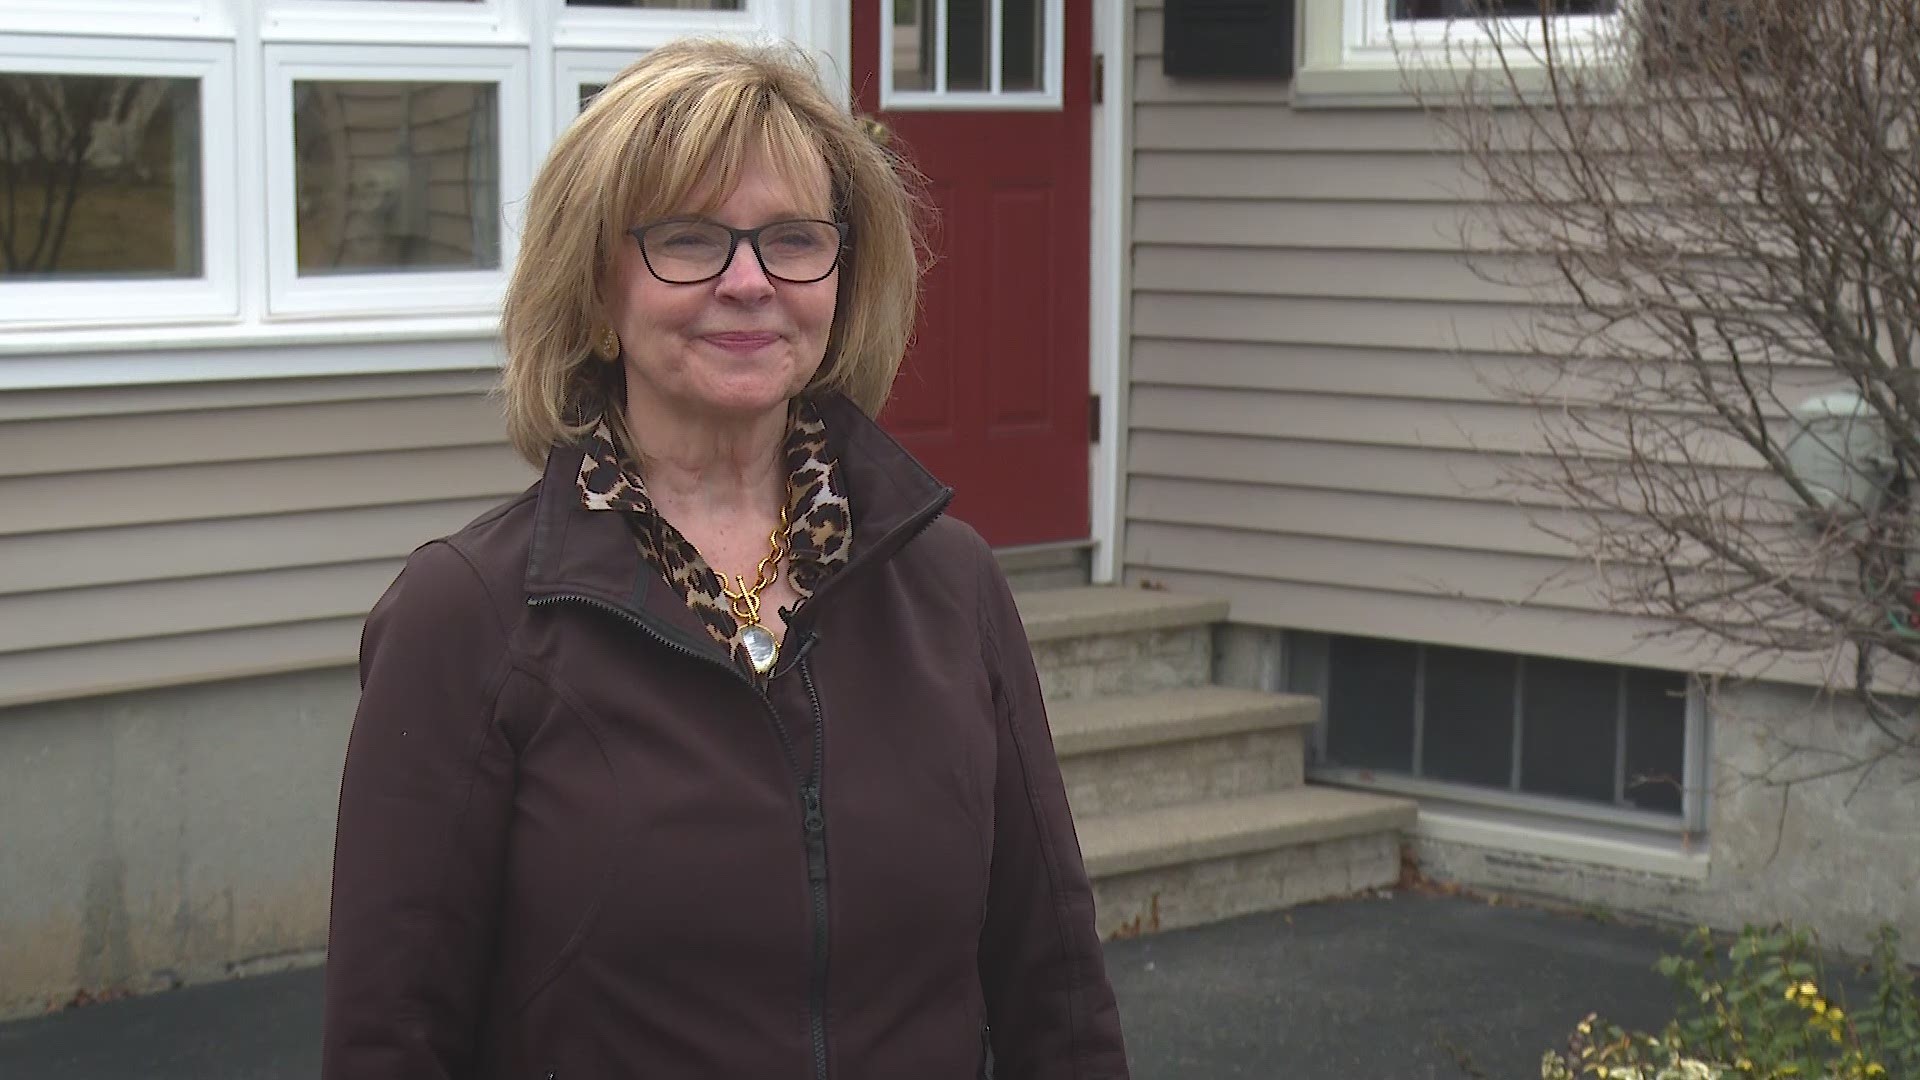 Right now, anyone can decide to be a home inspector in Maine. A bill to regulate home inspectors is under review